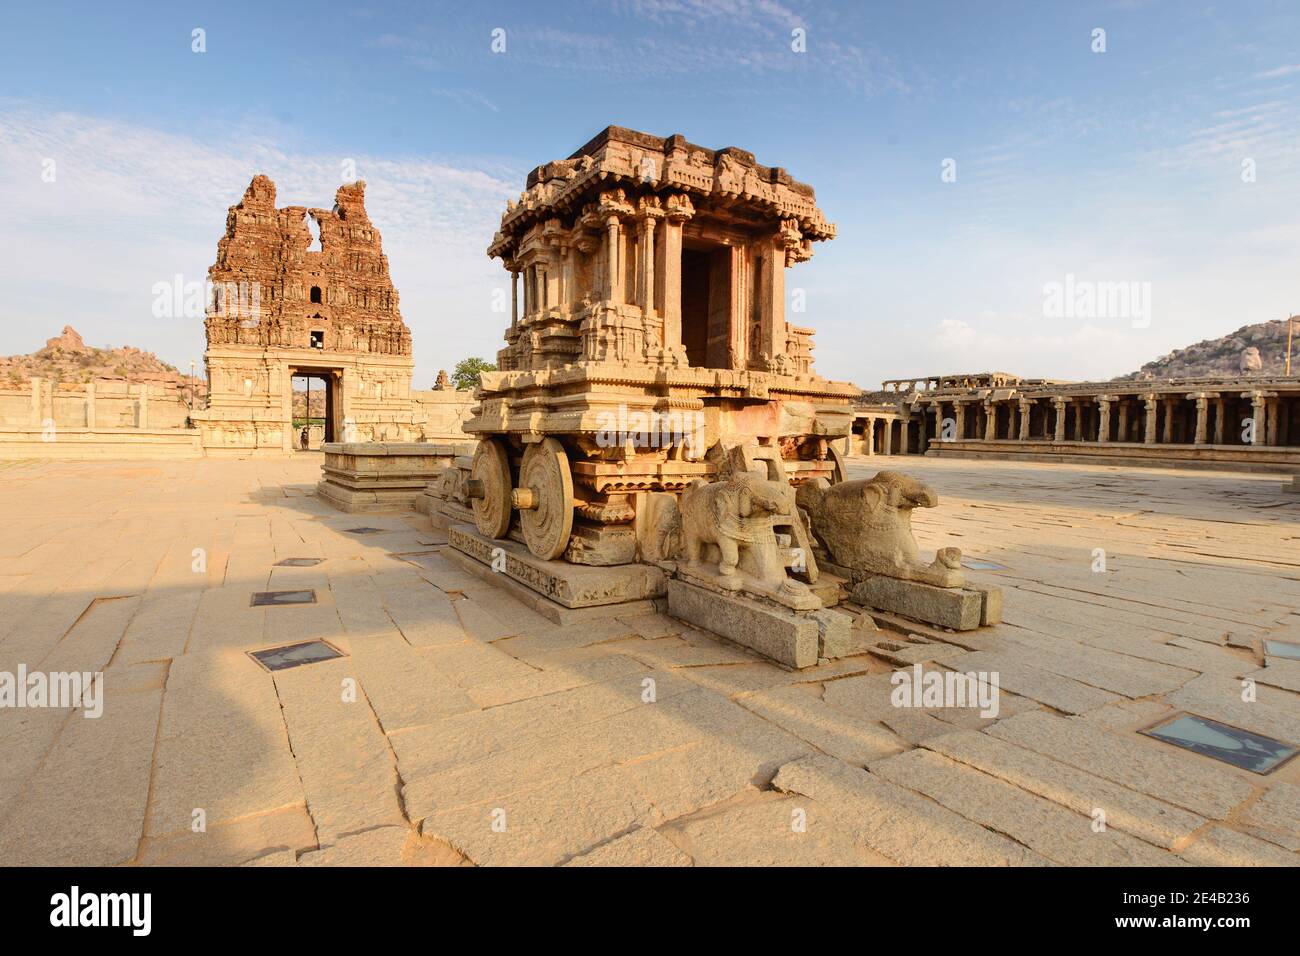 Unbelievable stone chariot in the courtyard of Vittala Temple at sunset in Hampi, Karnataka, India Stock Photo